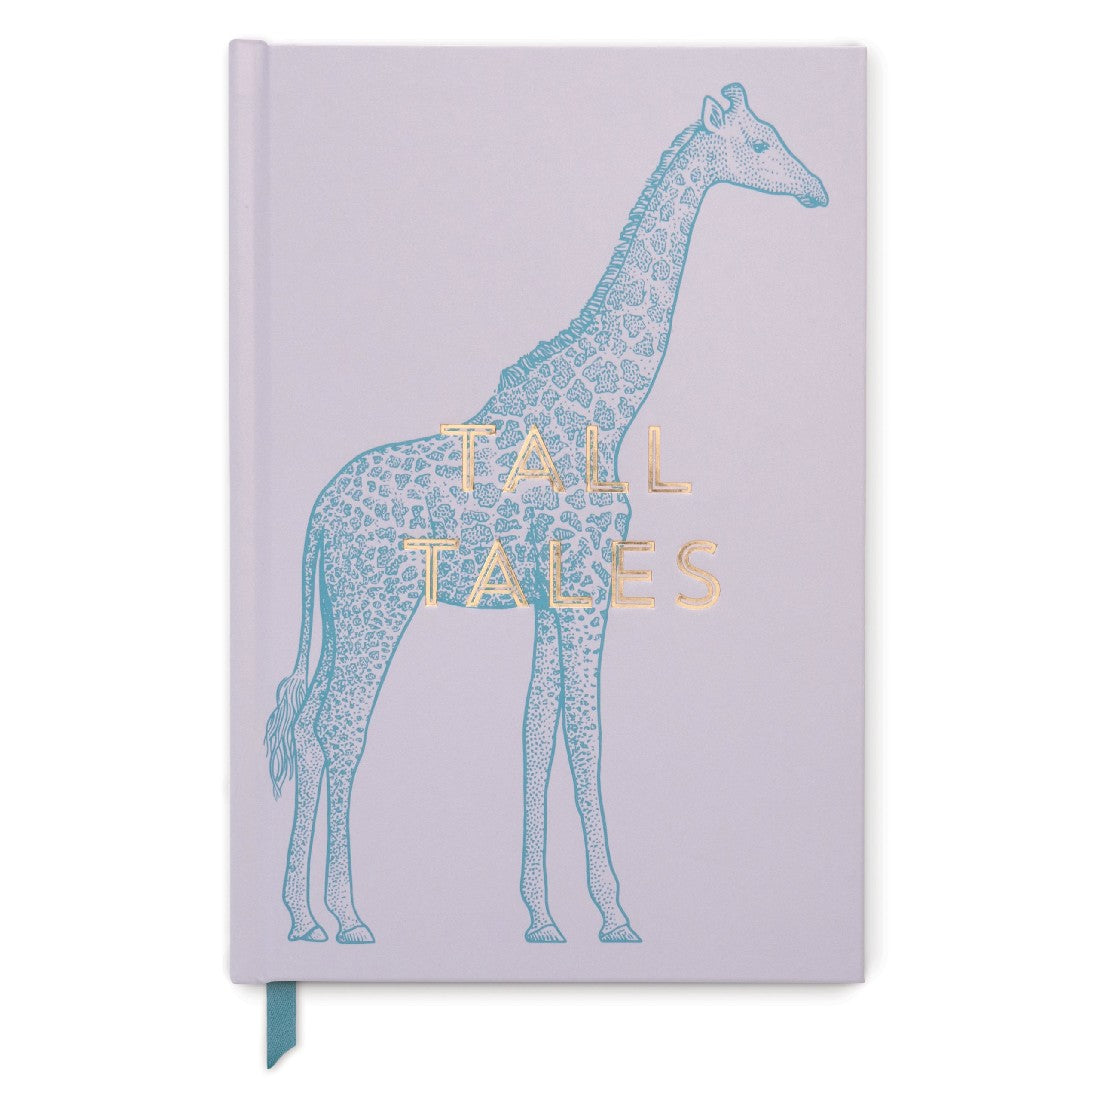 NOTEBOOK Vintage Sass Tall Tales Hard Cover 15x21cm 240 Lined pg